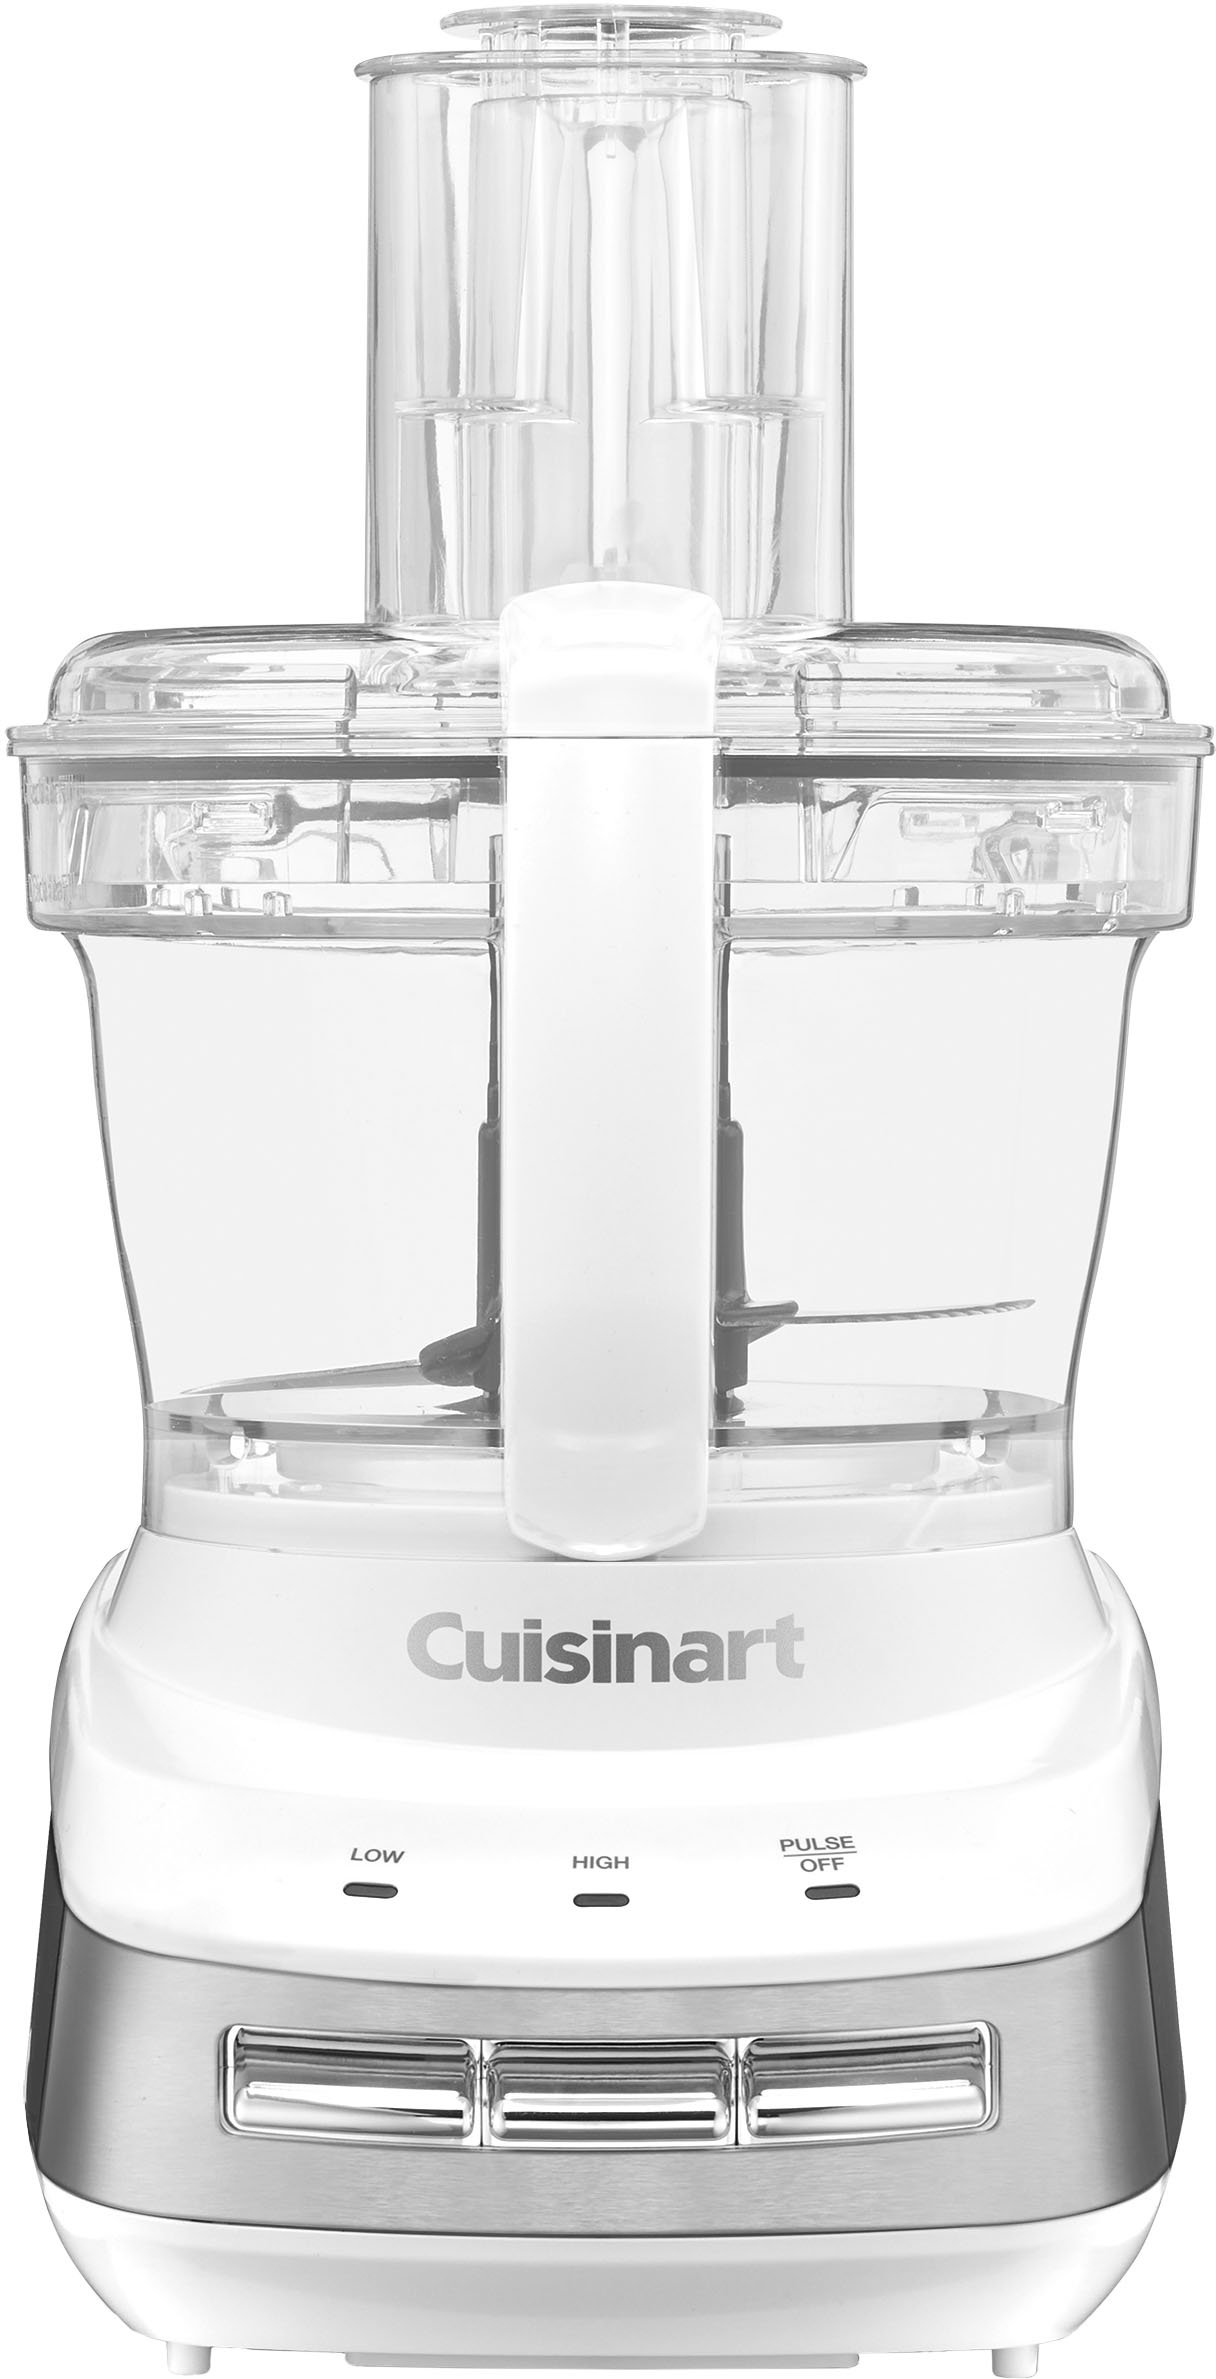 Cuisinart - Core Custom 10-Cup Food Processor - White & Stainless